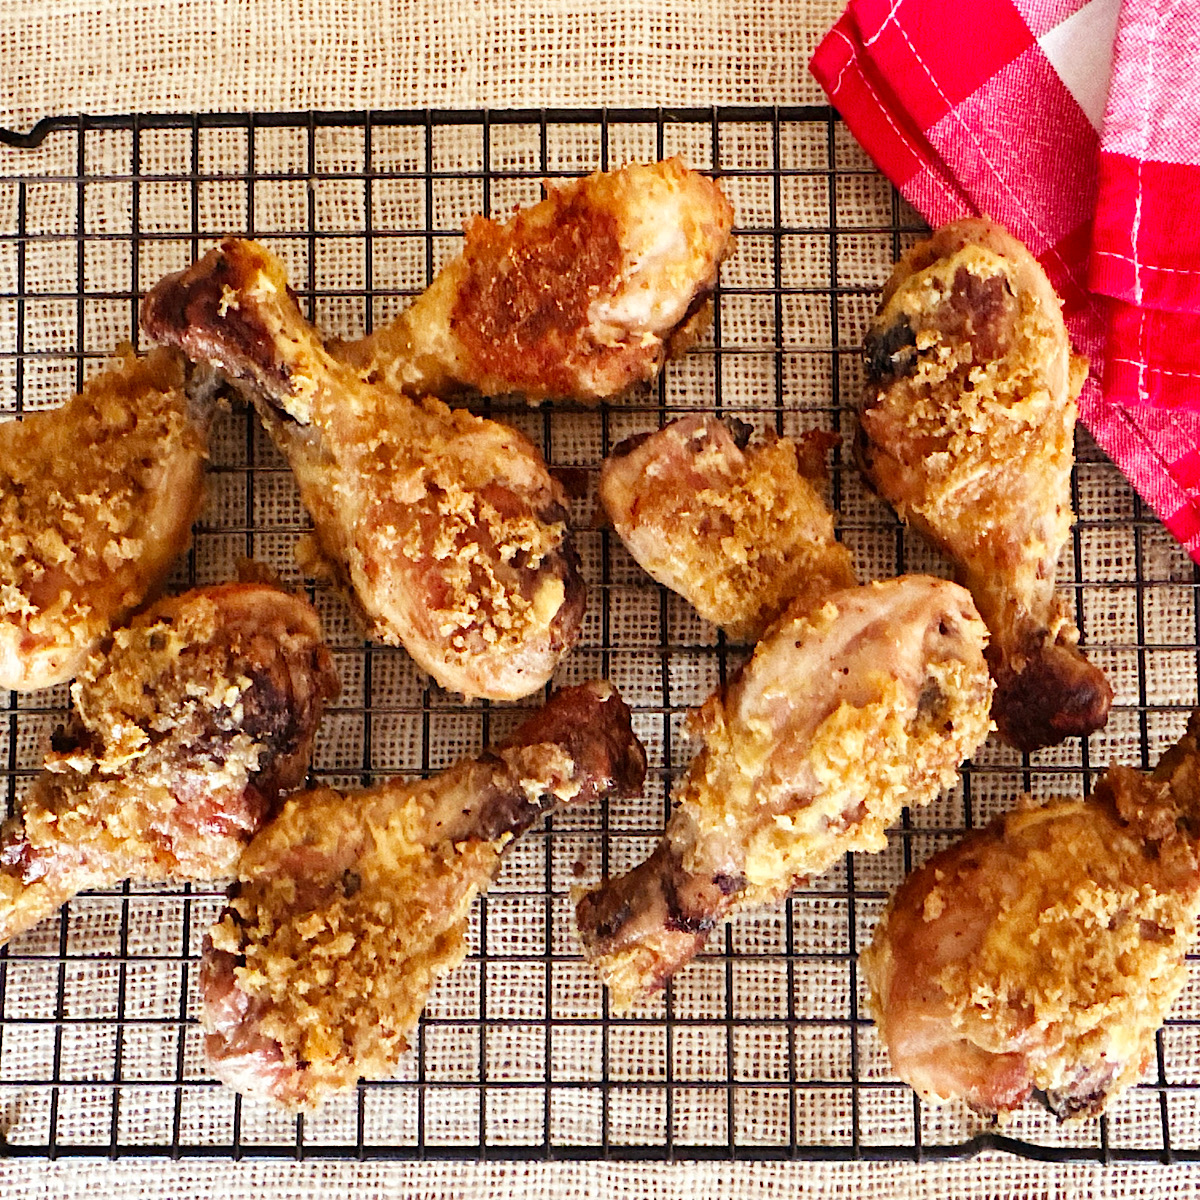 Baked chicken legs with low carb mustard and breading coating.